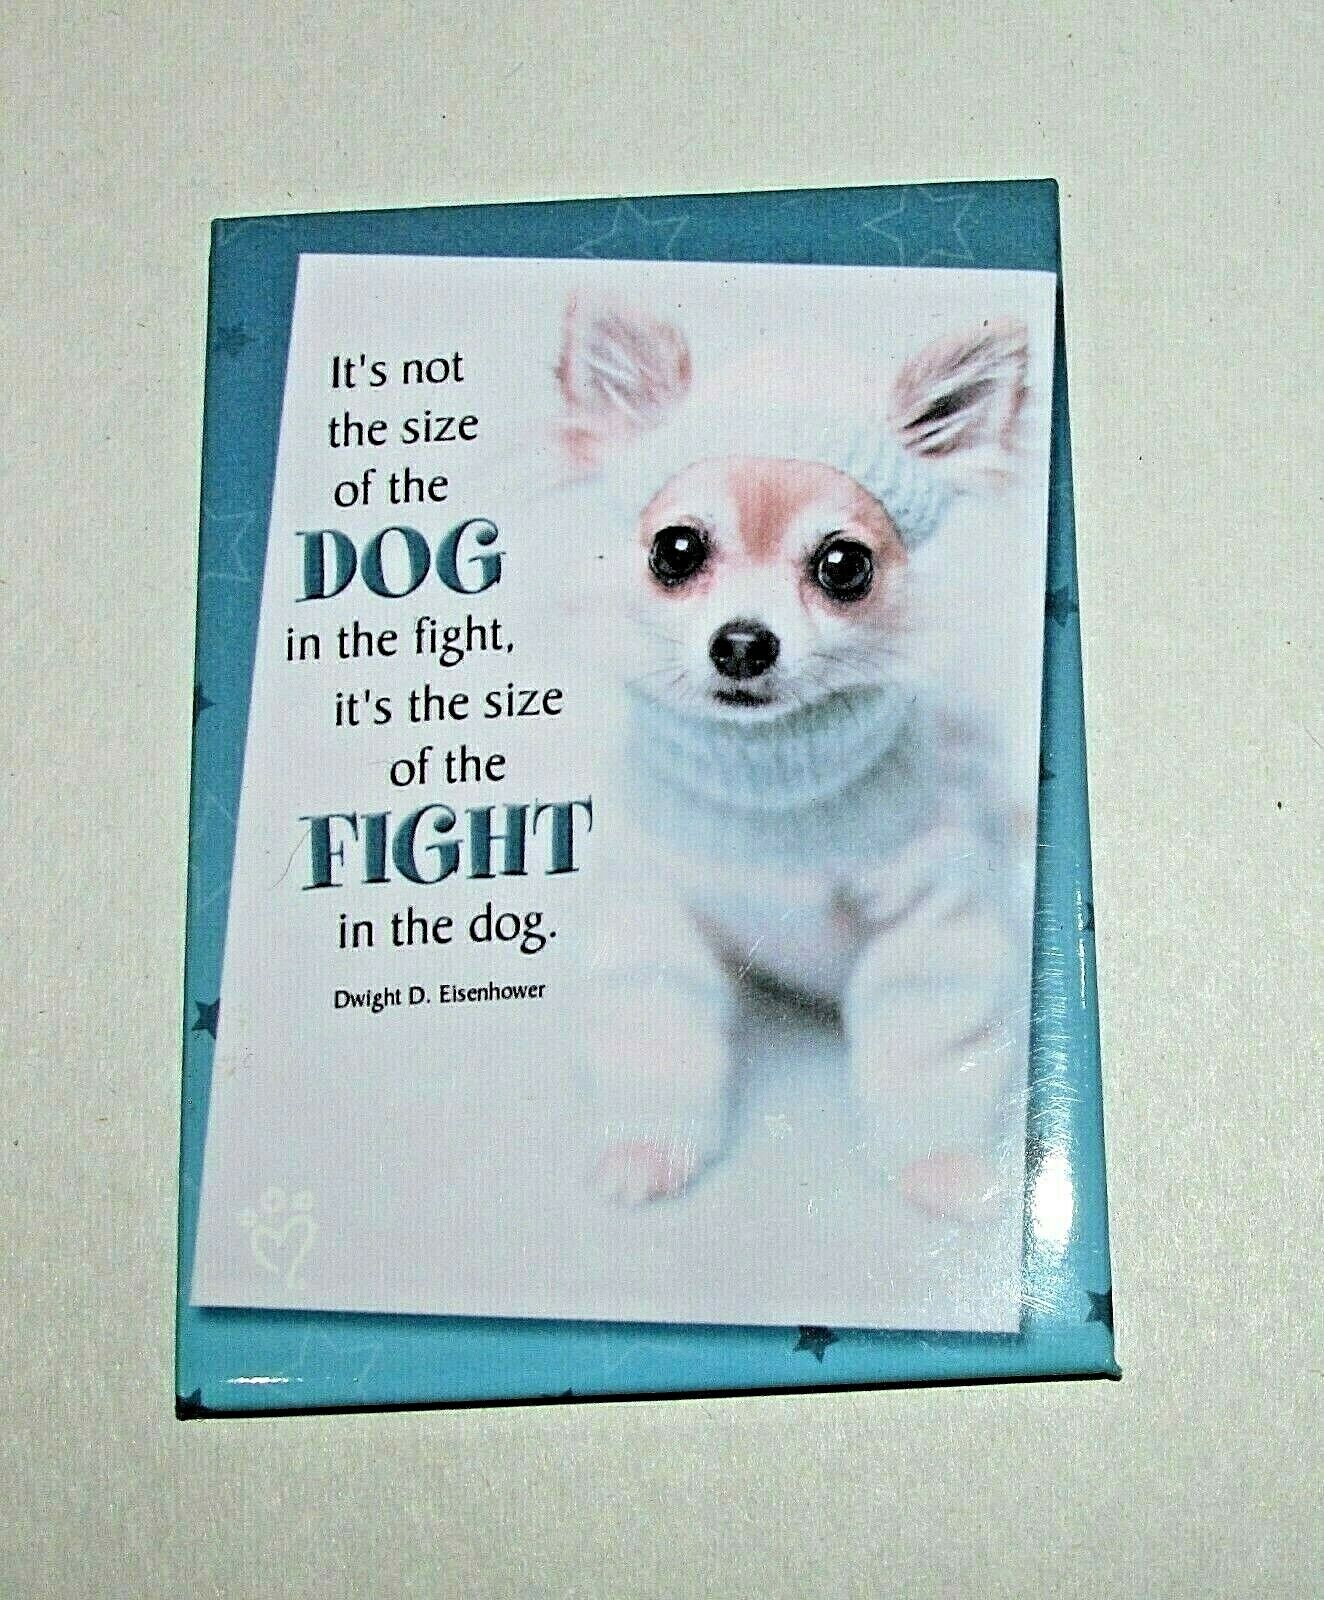 Chihuahua Dog Dwight Eisenhower Quote Leaningtree 3" Refrigerator Magnet Free Sh